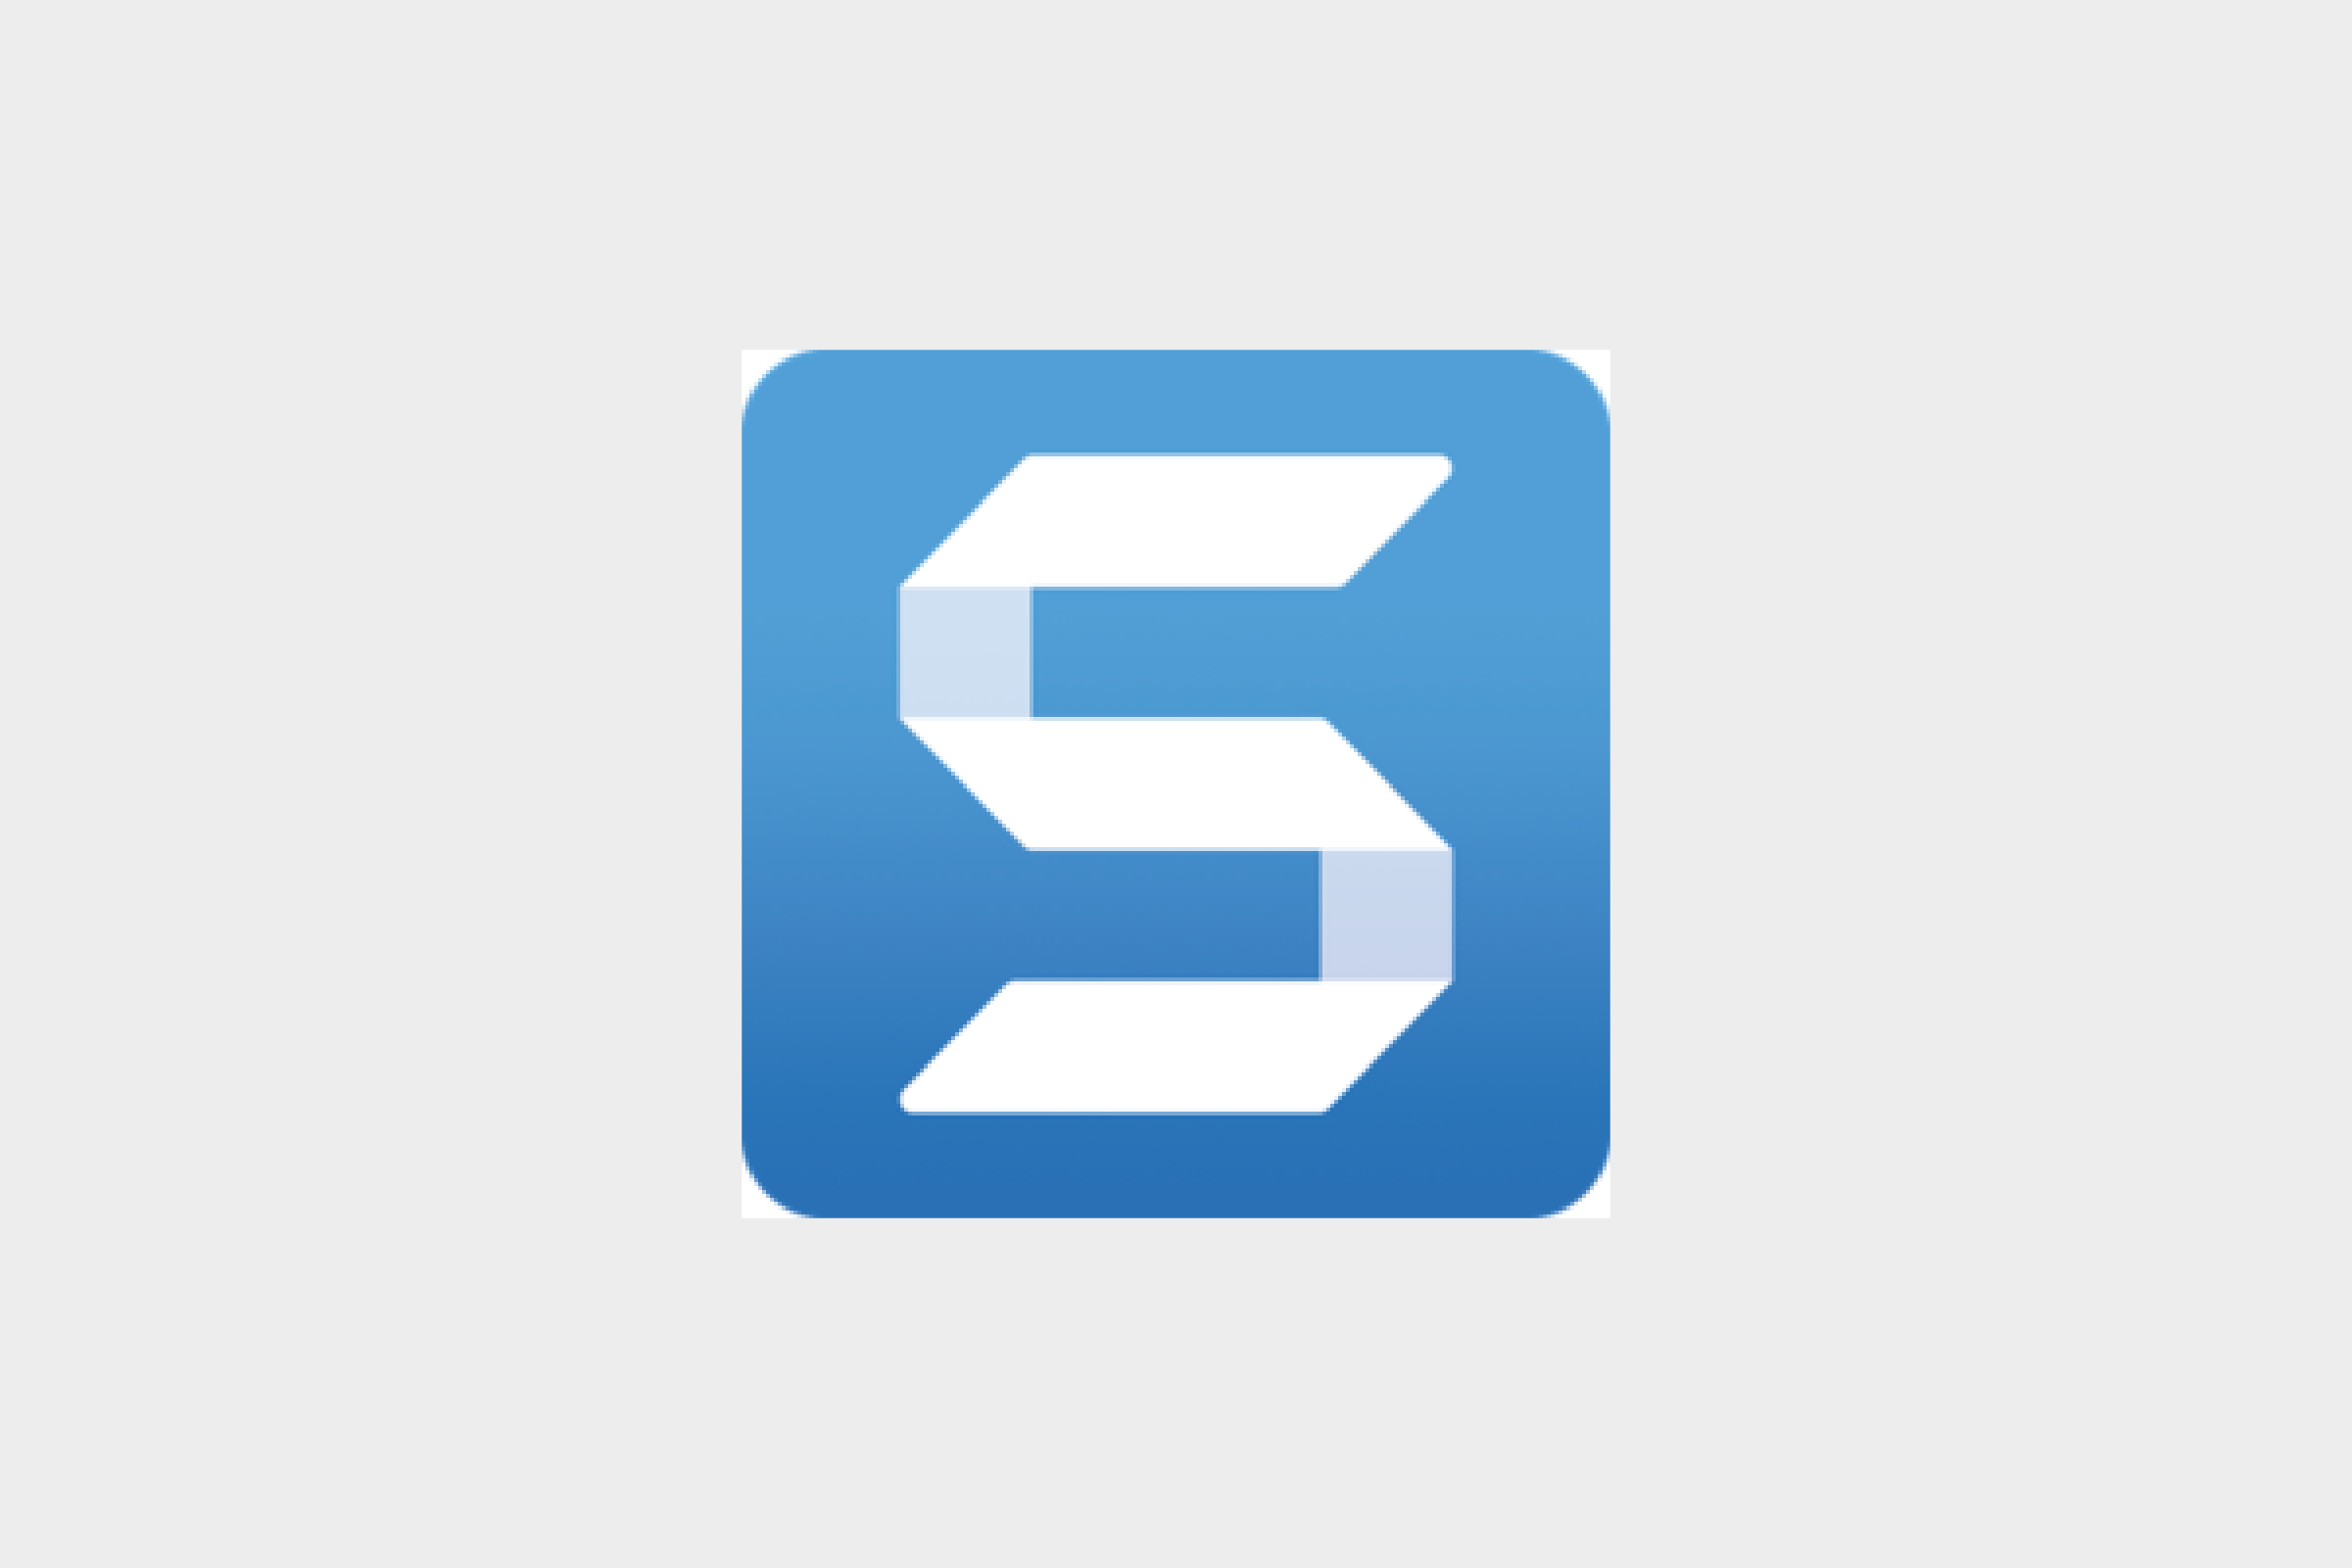 drag snagit icon with web site